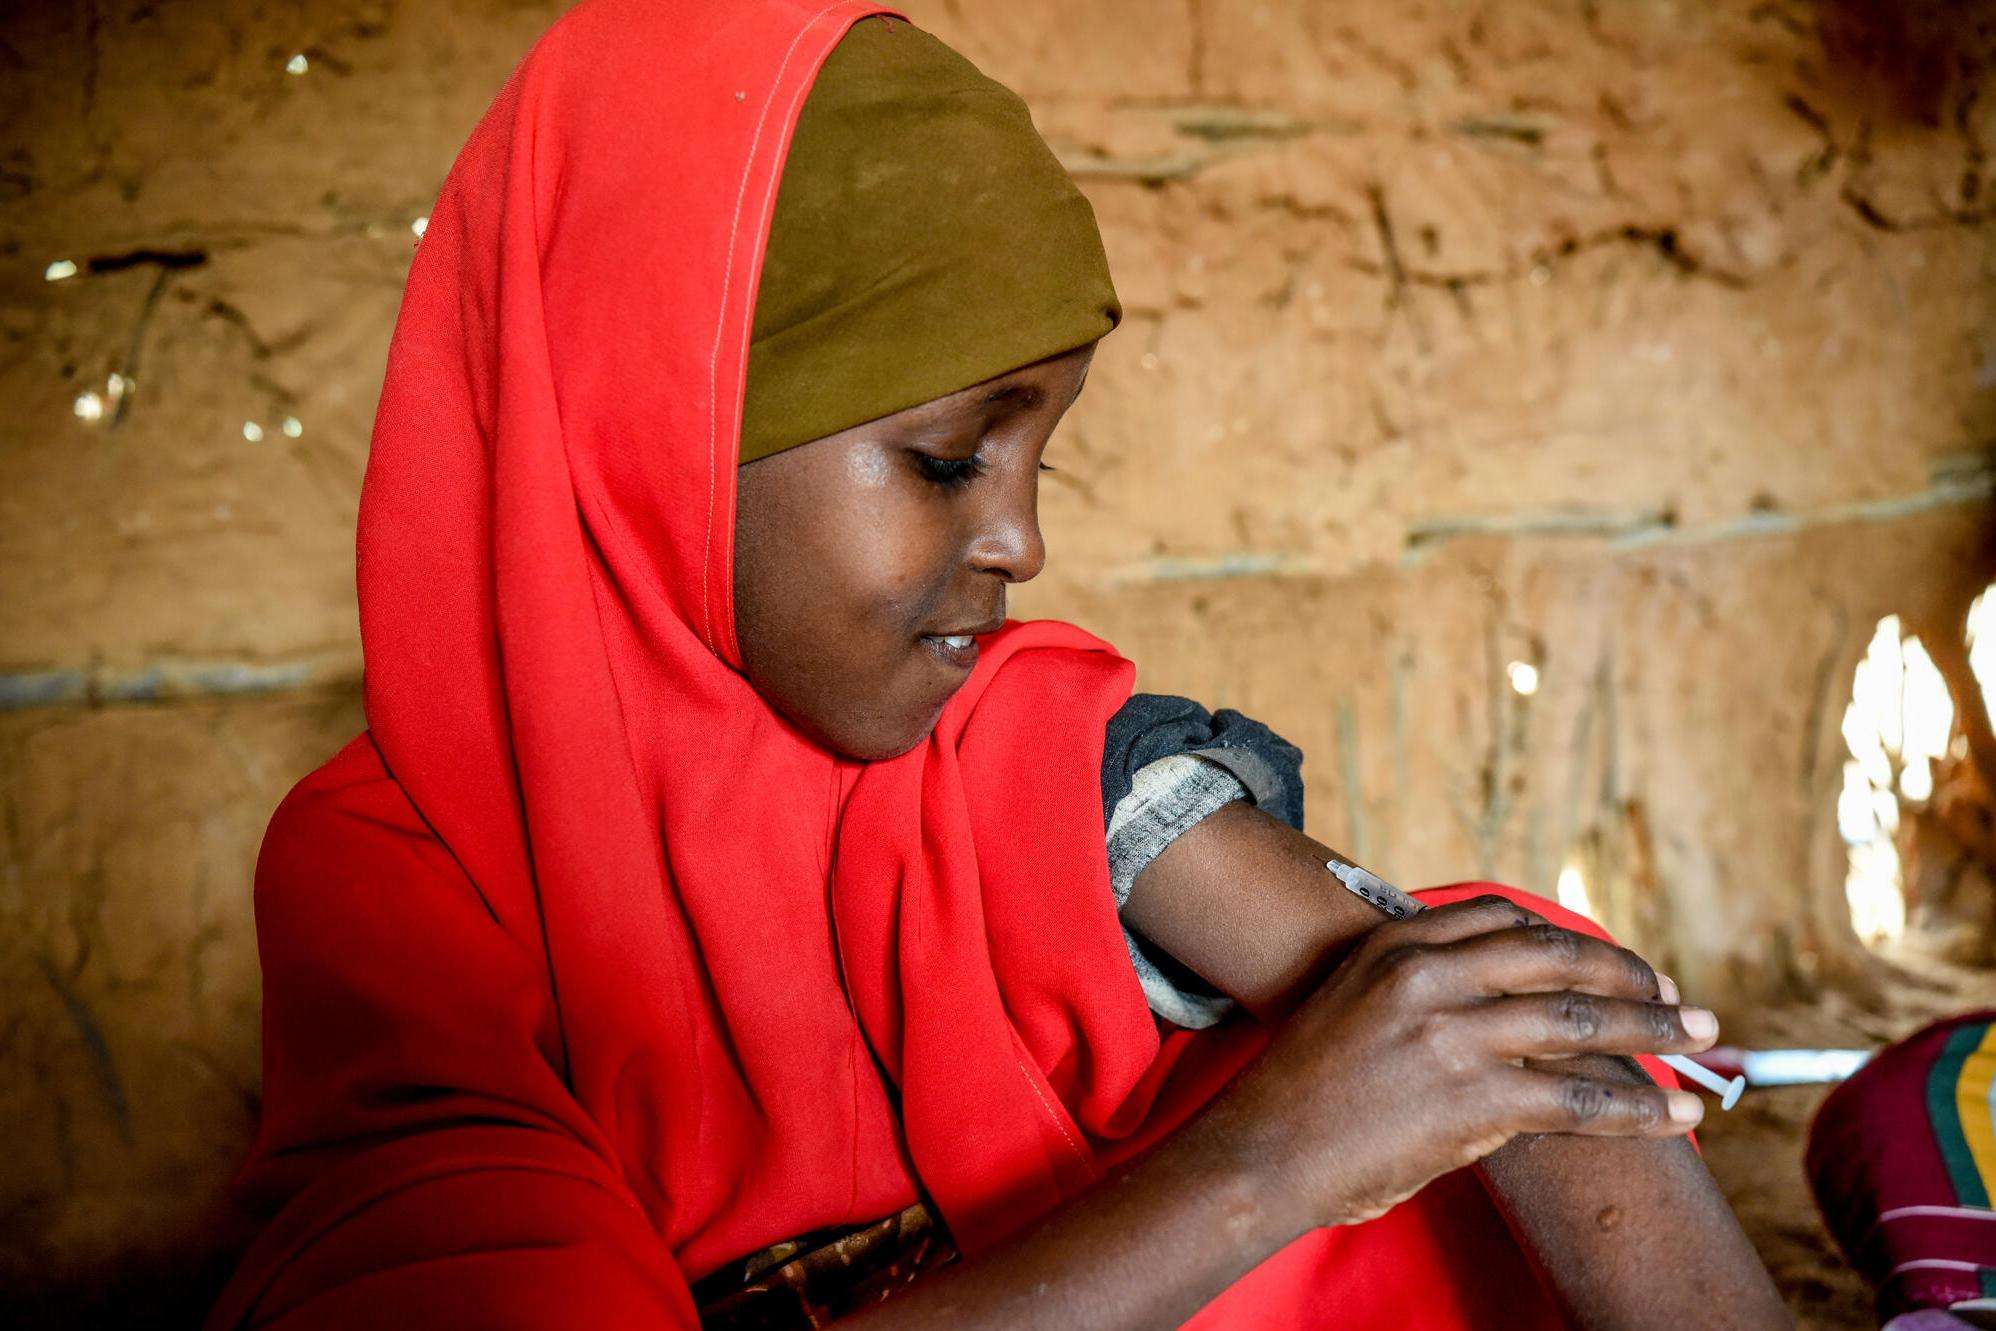 A young girl in a red headscarf injects insulin in Kenya.